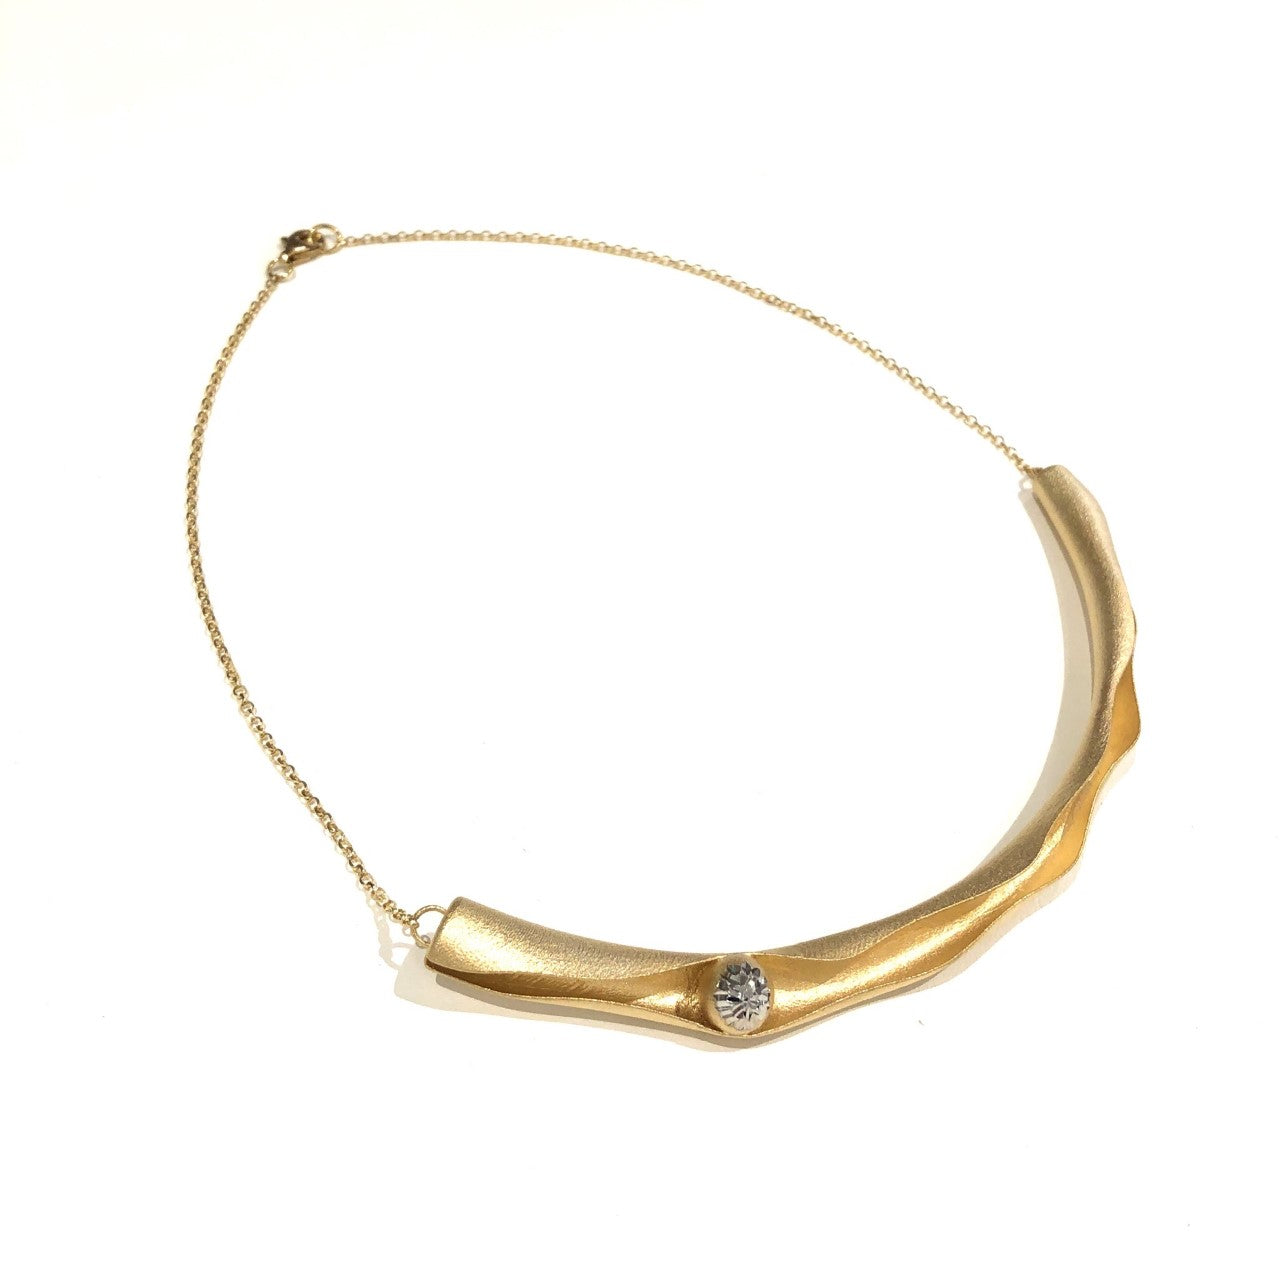 One of A Kind 14K Yellow Gold Collar Necklace